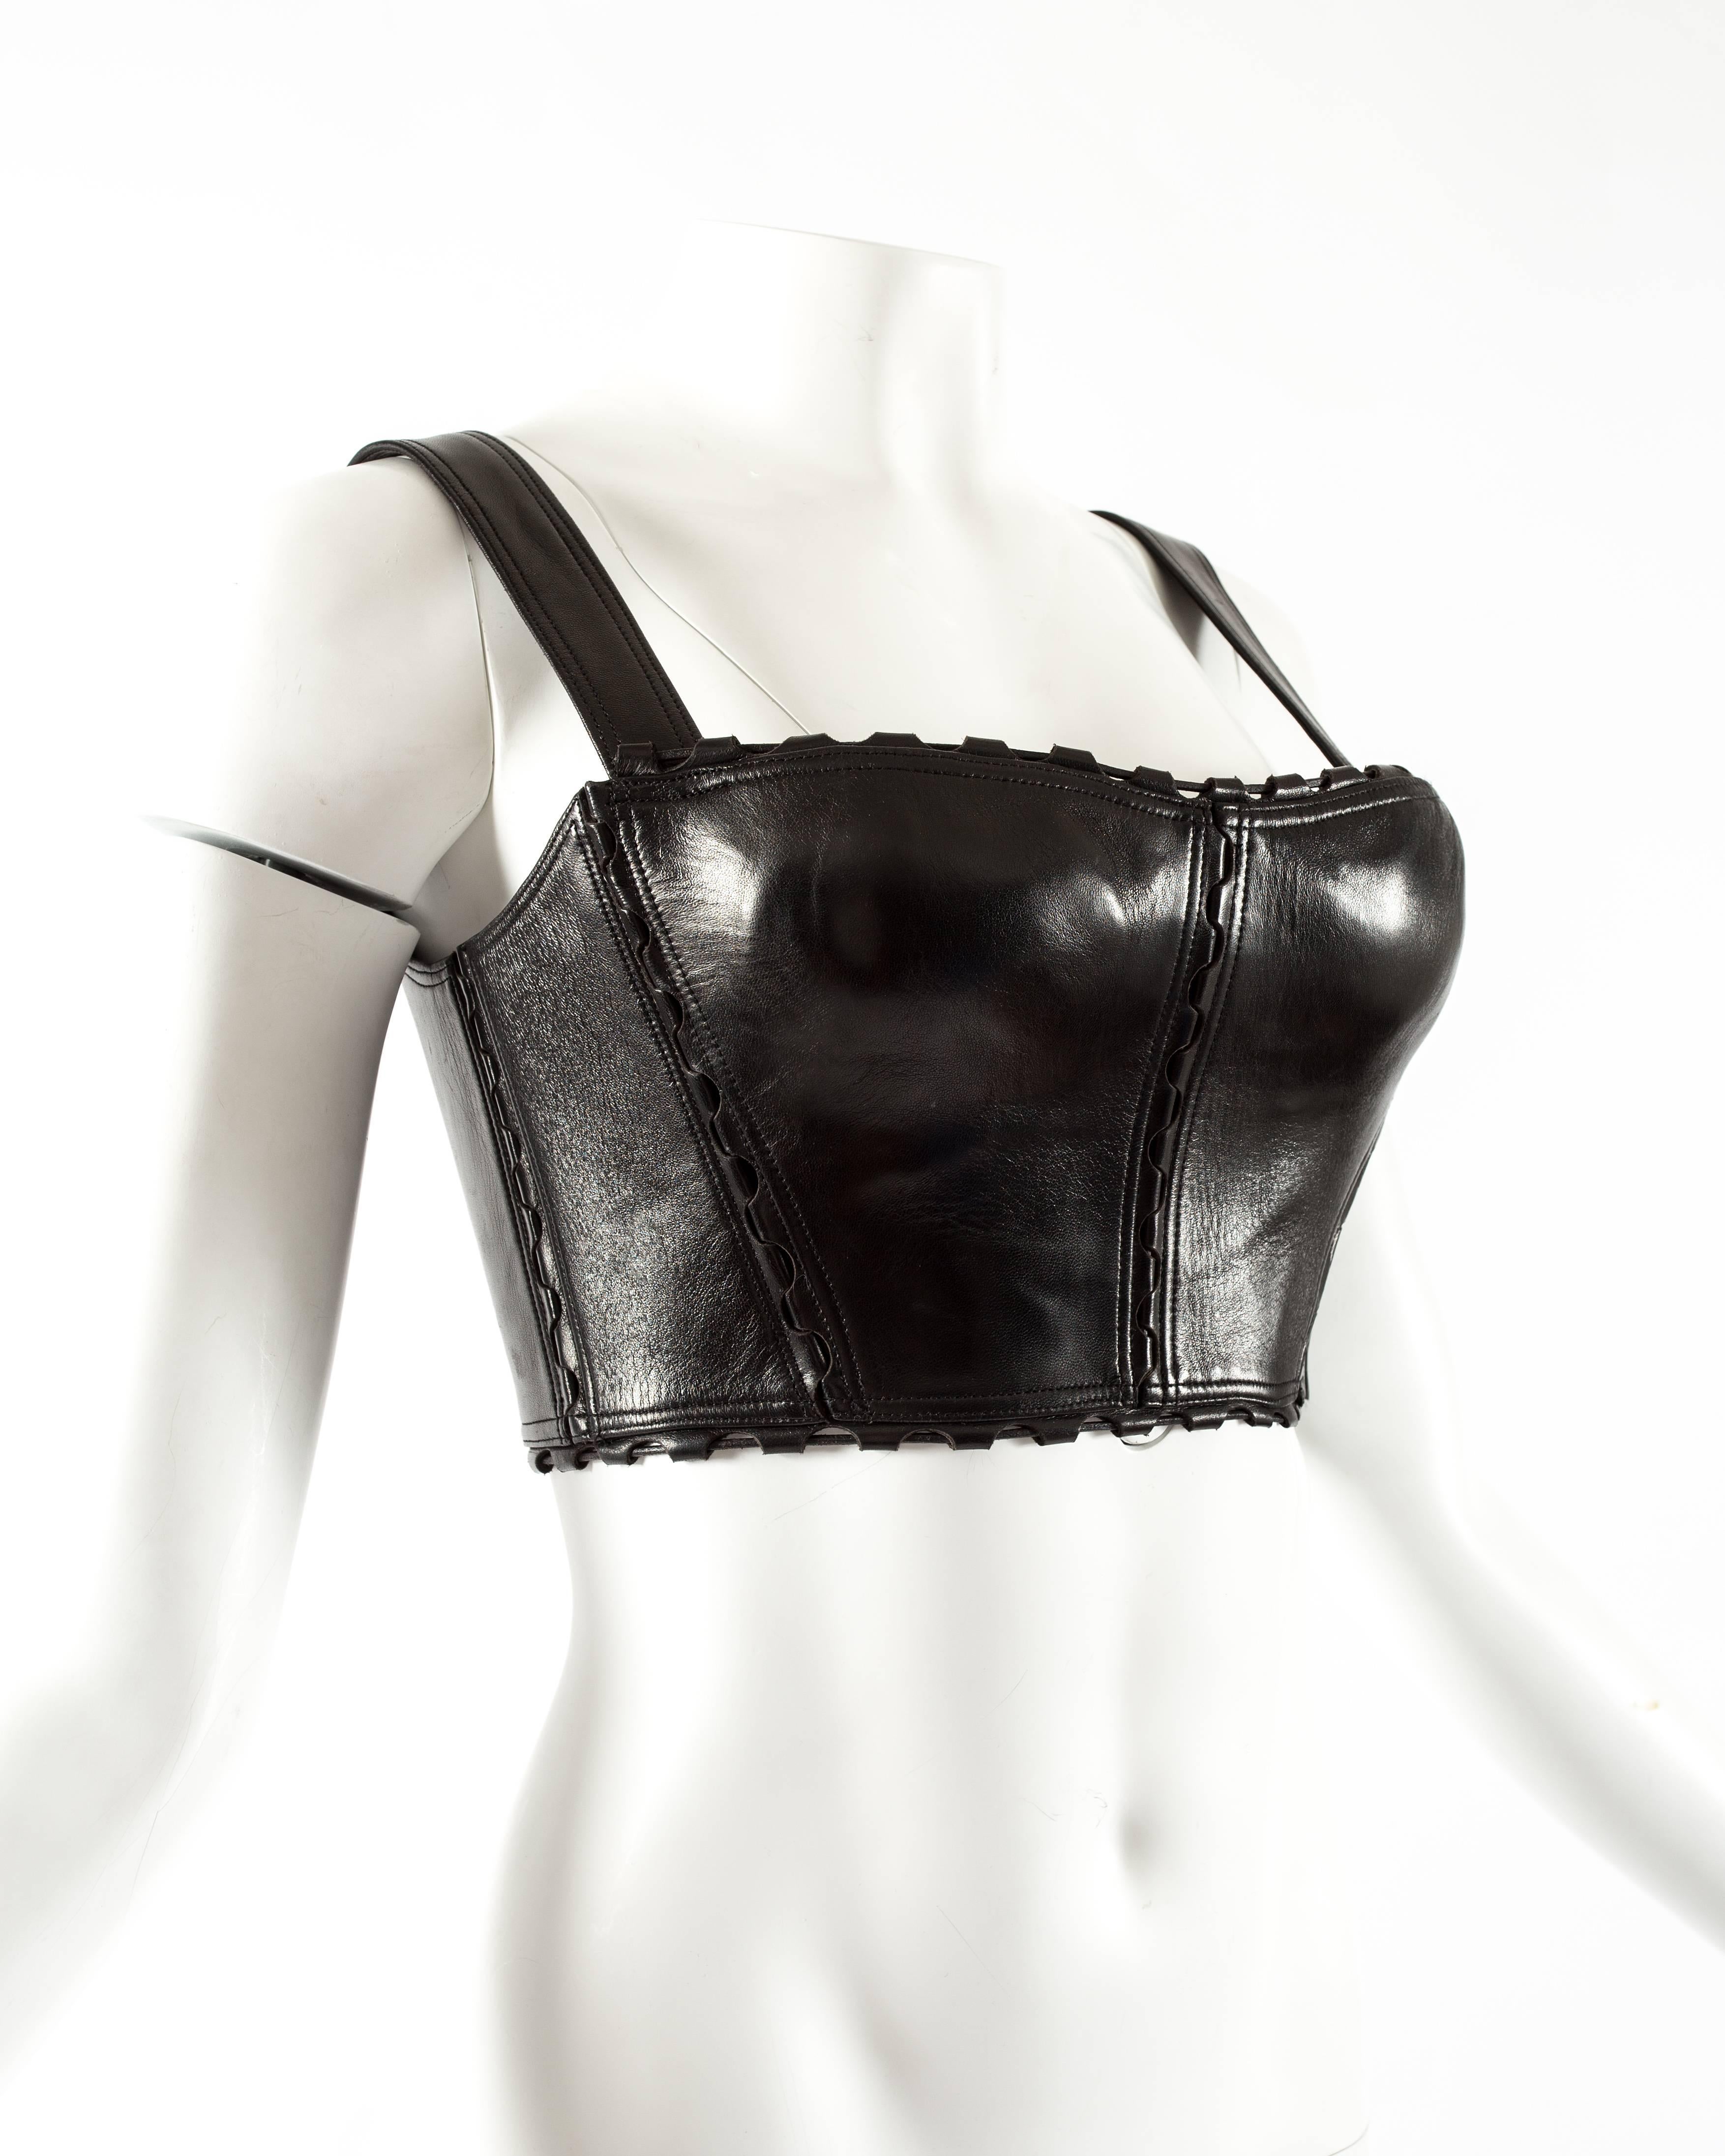 Azzedine Alaia Spring-Summer 1992 black leather lace up bra